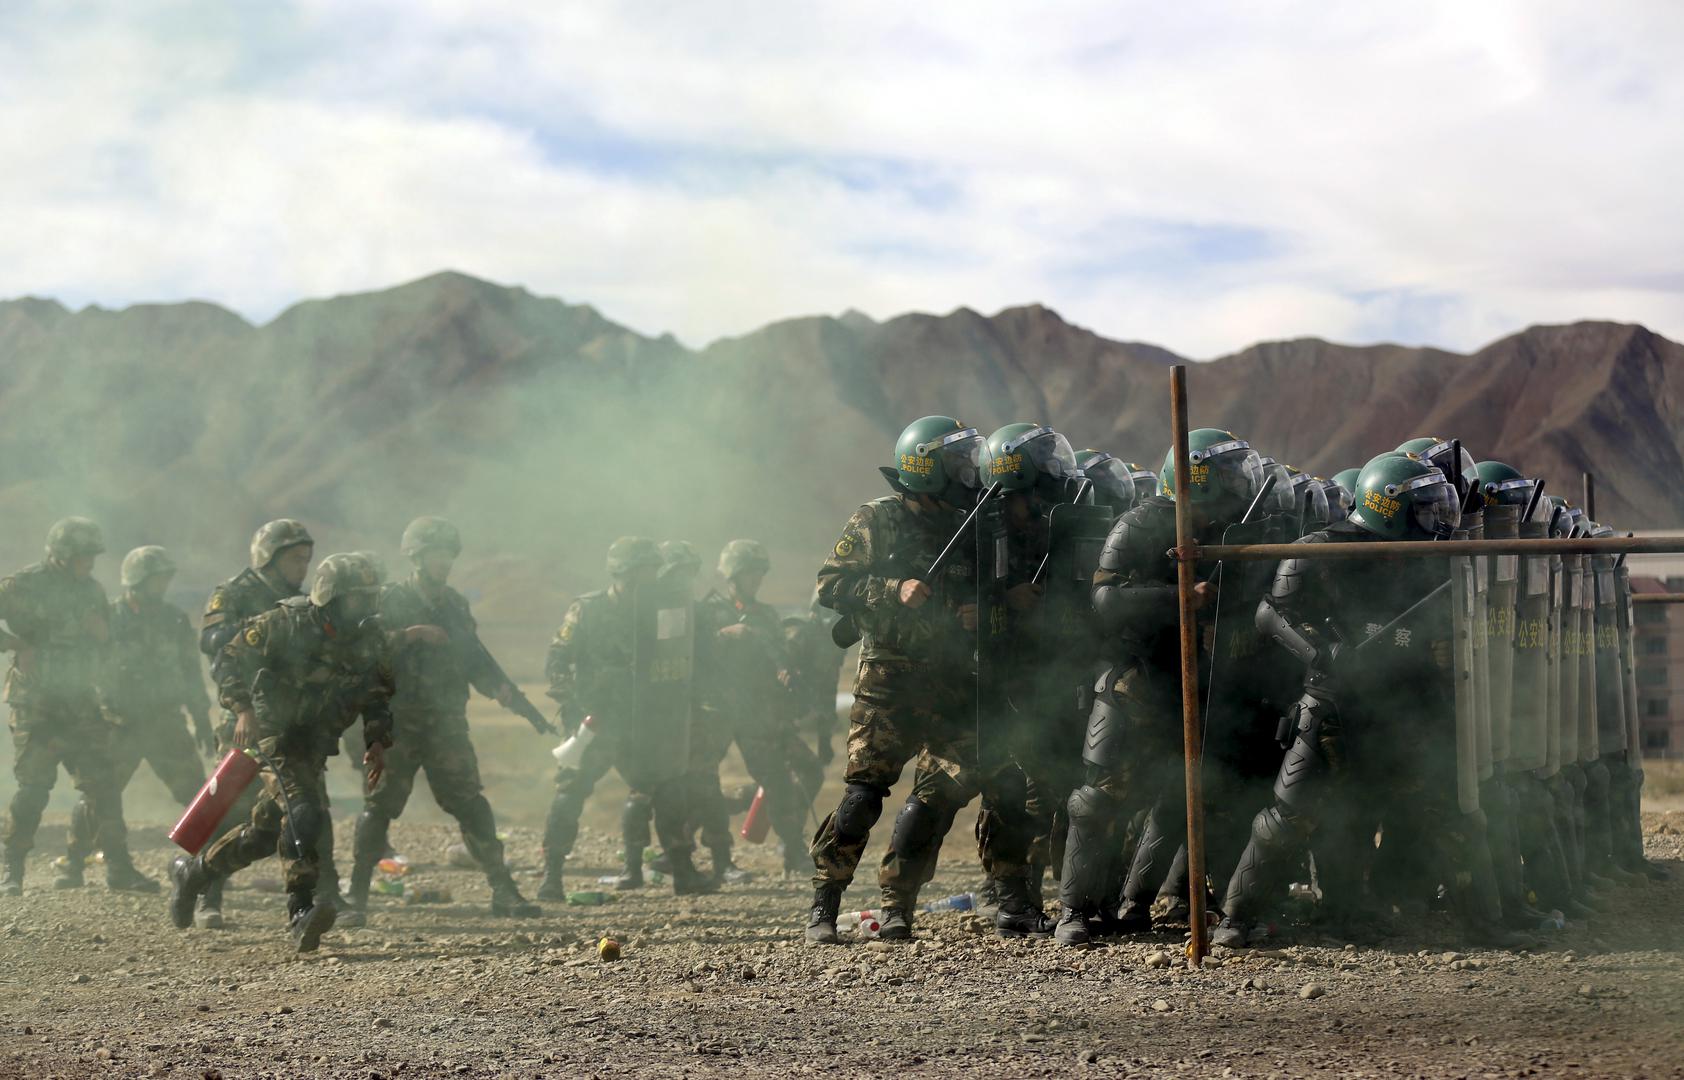 A unit from the Chinese People's Armed Police Force participates in a drill with riot gear at a military base in Shigatse, Tibet Autonomous Region, China on October 24, 2015.